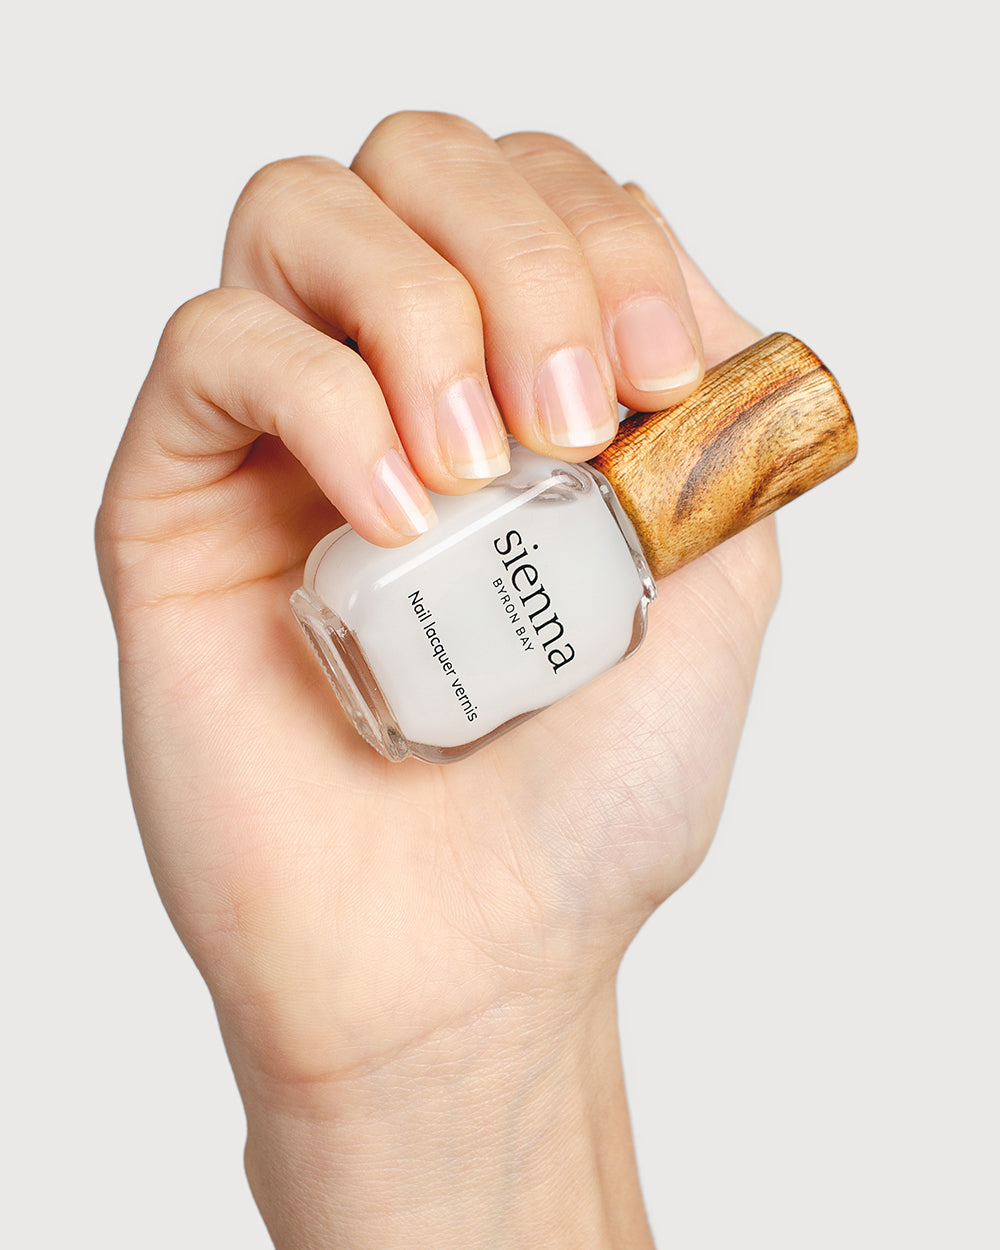 Do Nail Strengtheners Really Work? Here's What To Know